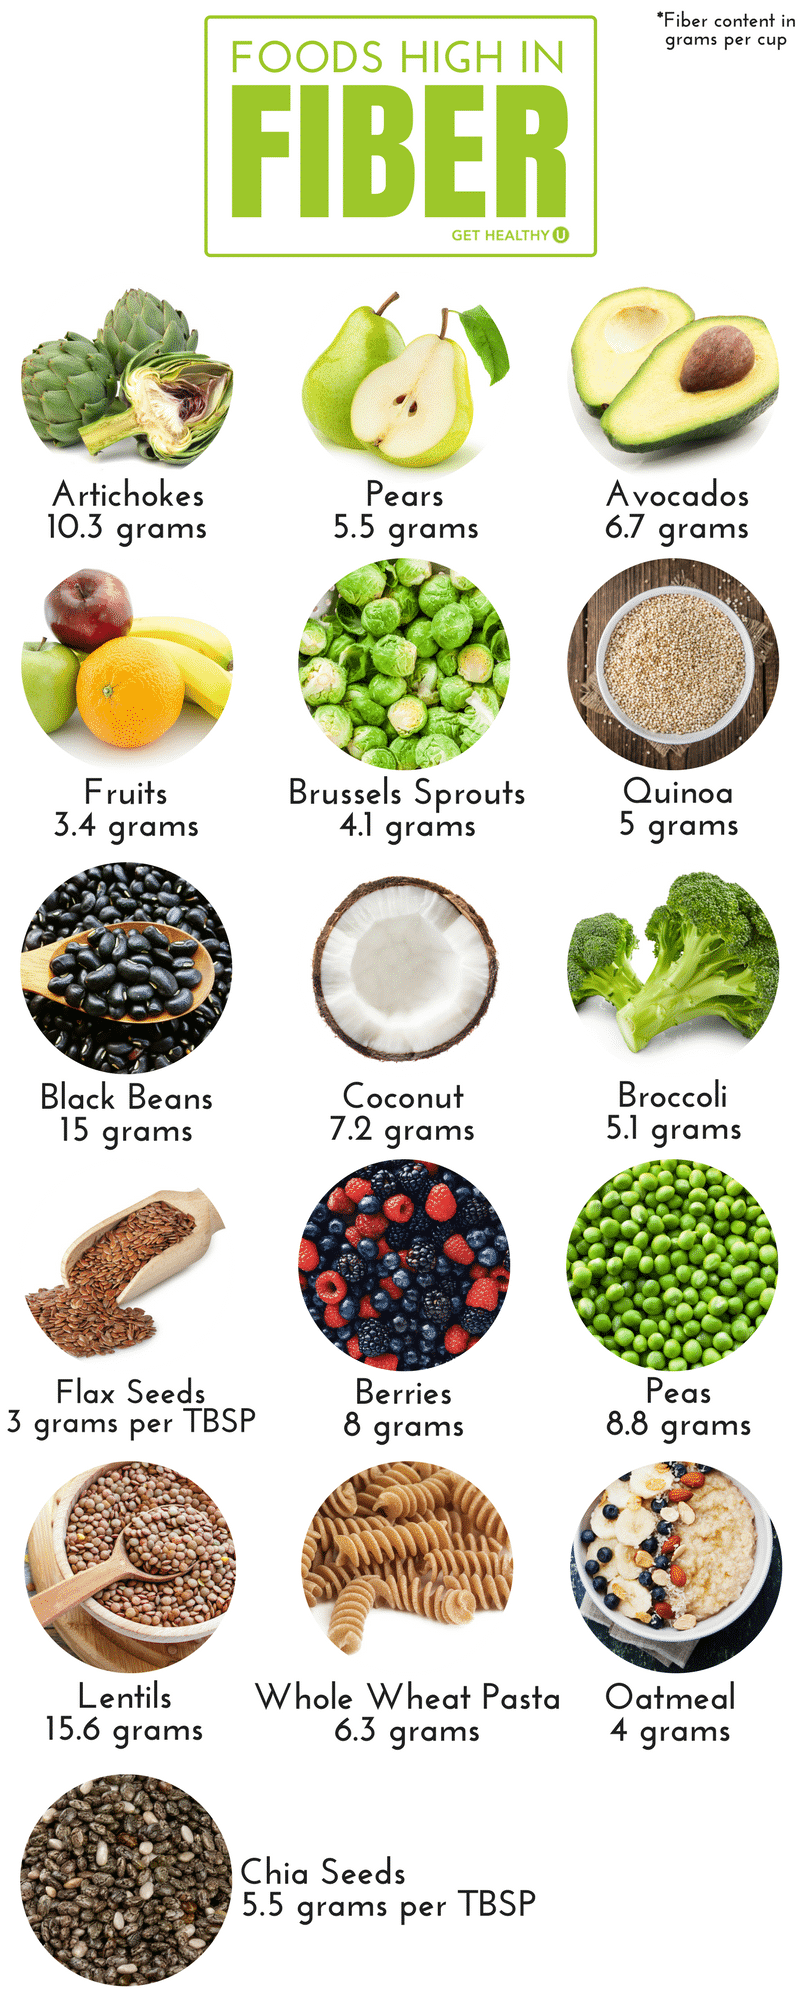 Check out this graphic that depicts foods that are high in fiber that will benefit your diet!